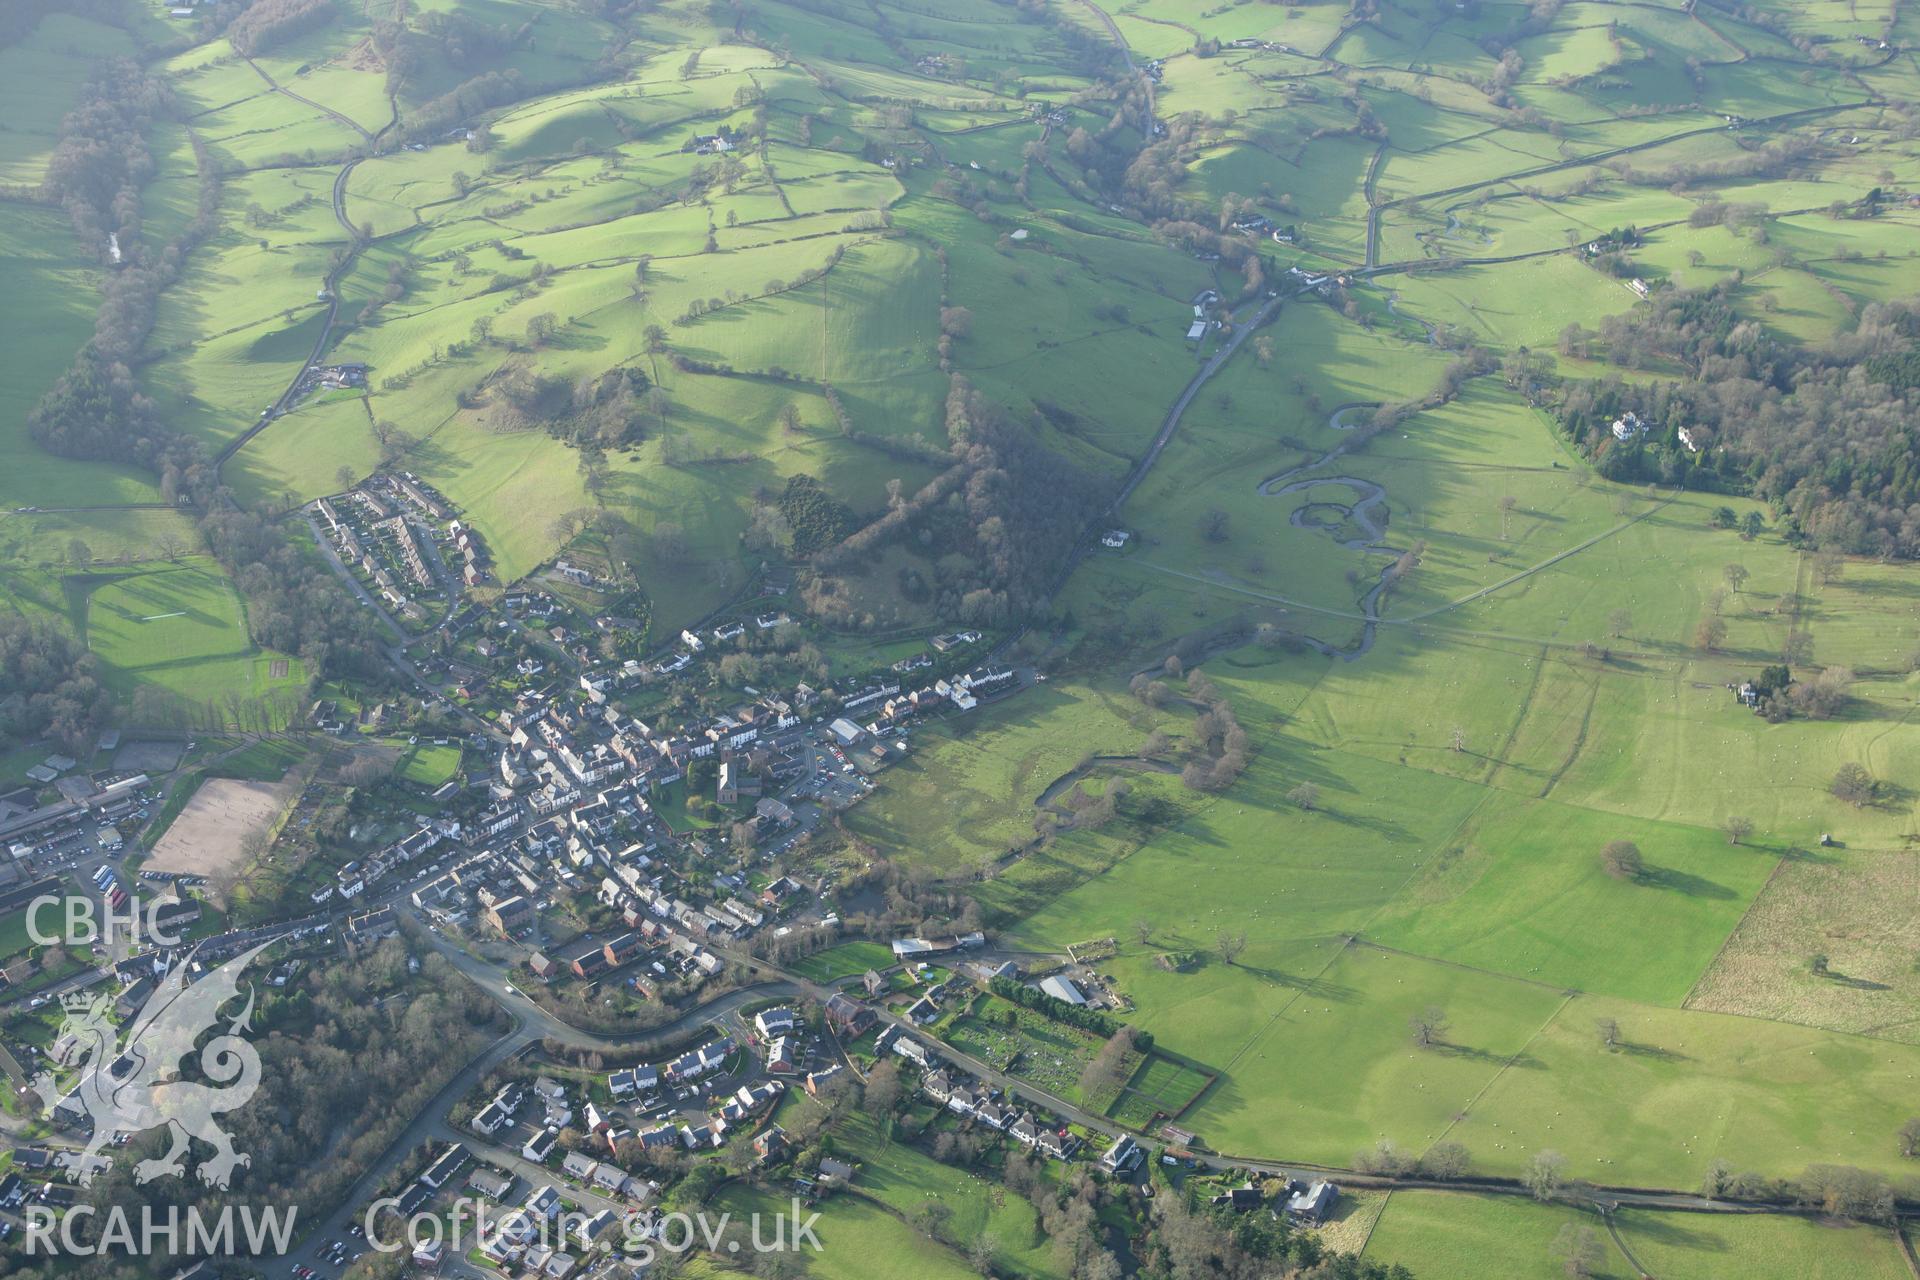 RCAHMW colour oblique aerial photograph of Llanfyllin vilage. Taken on 10 December 2009 by Toby Driver